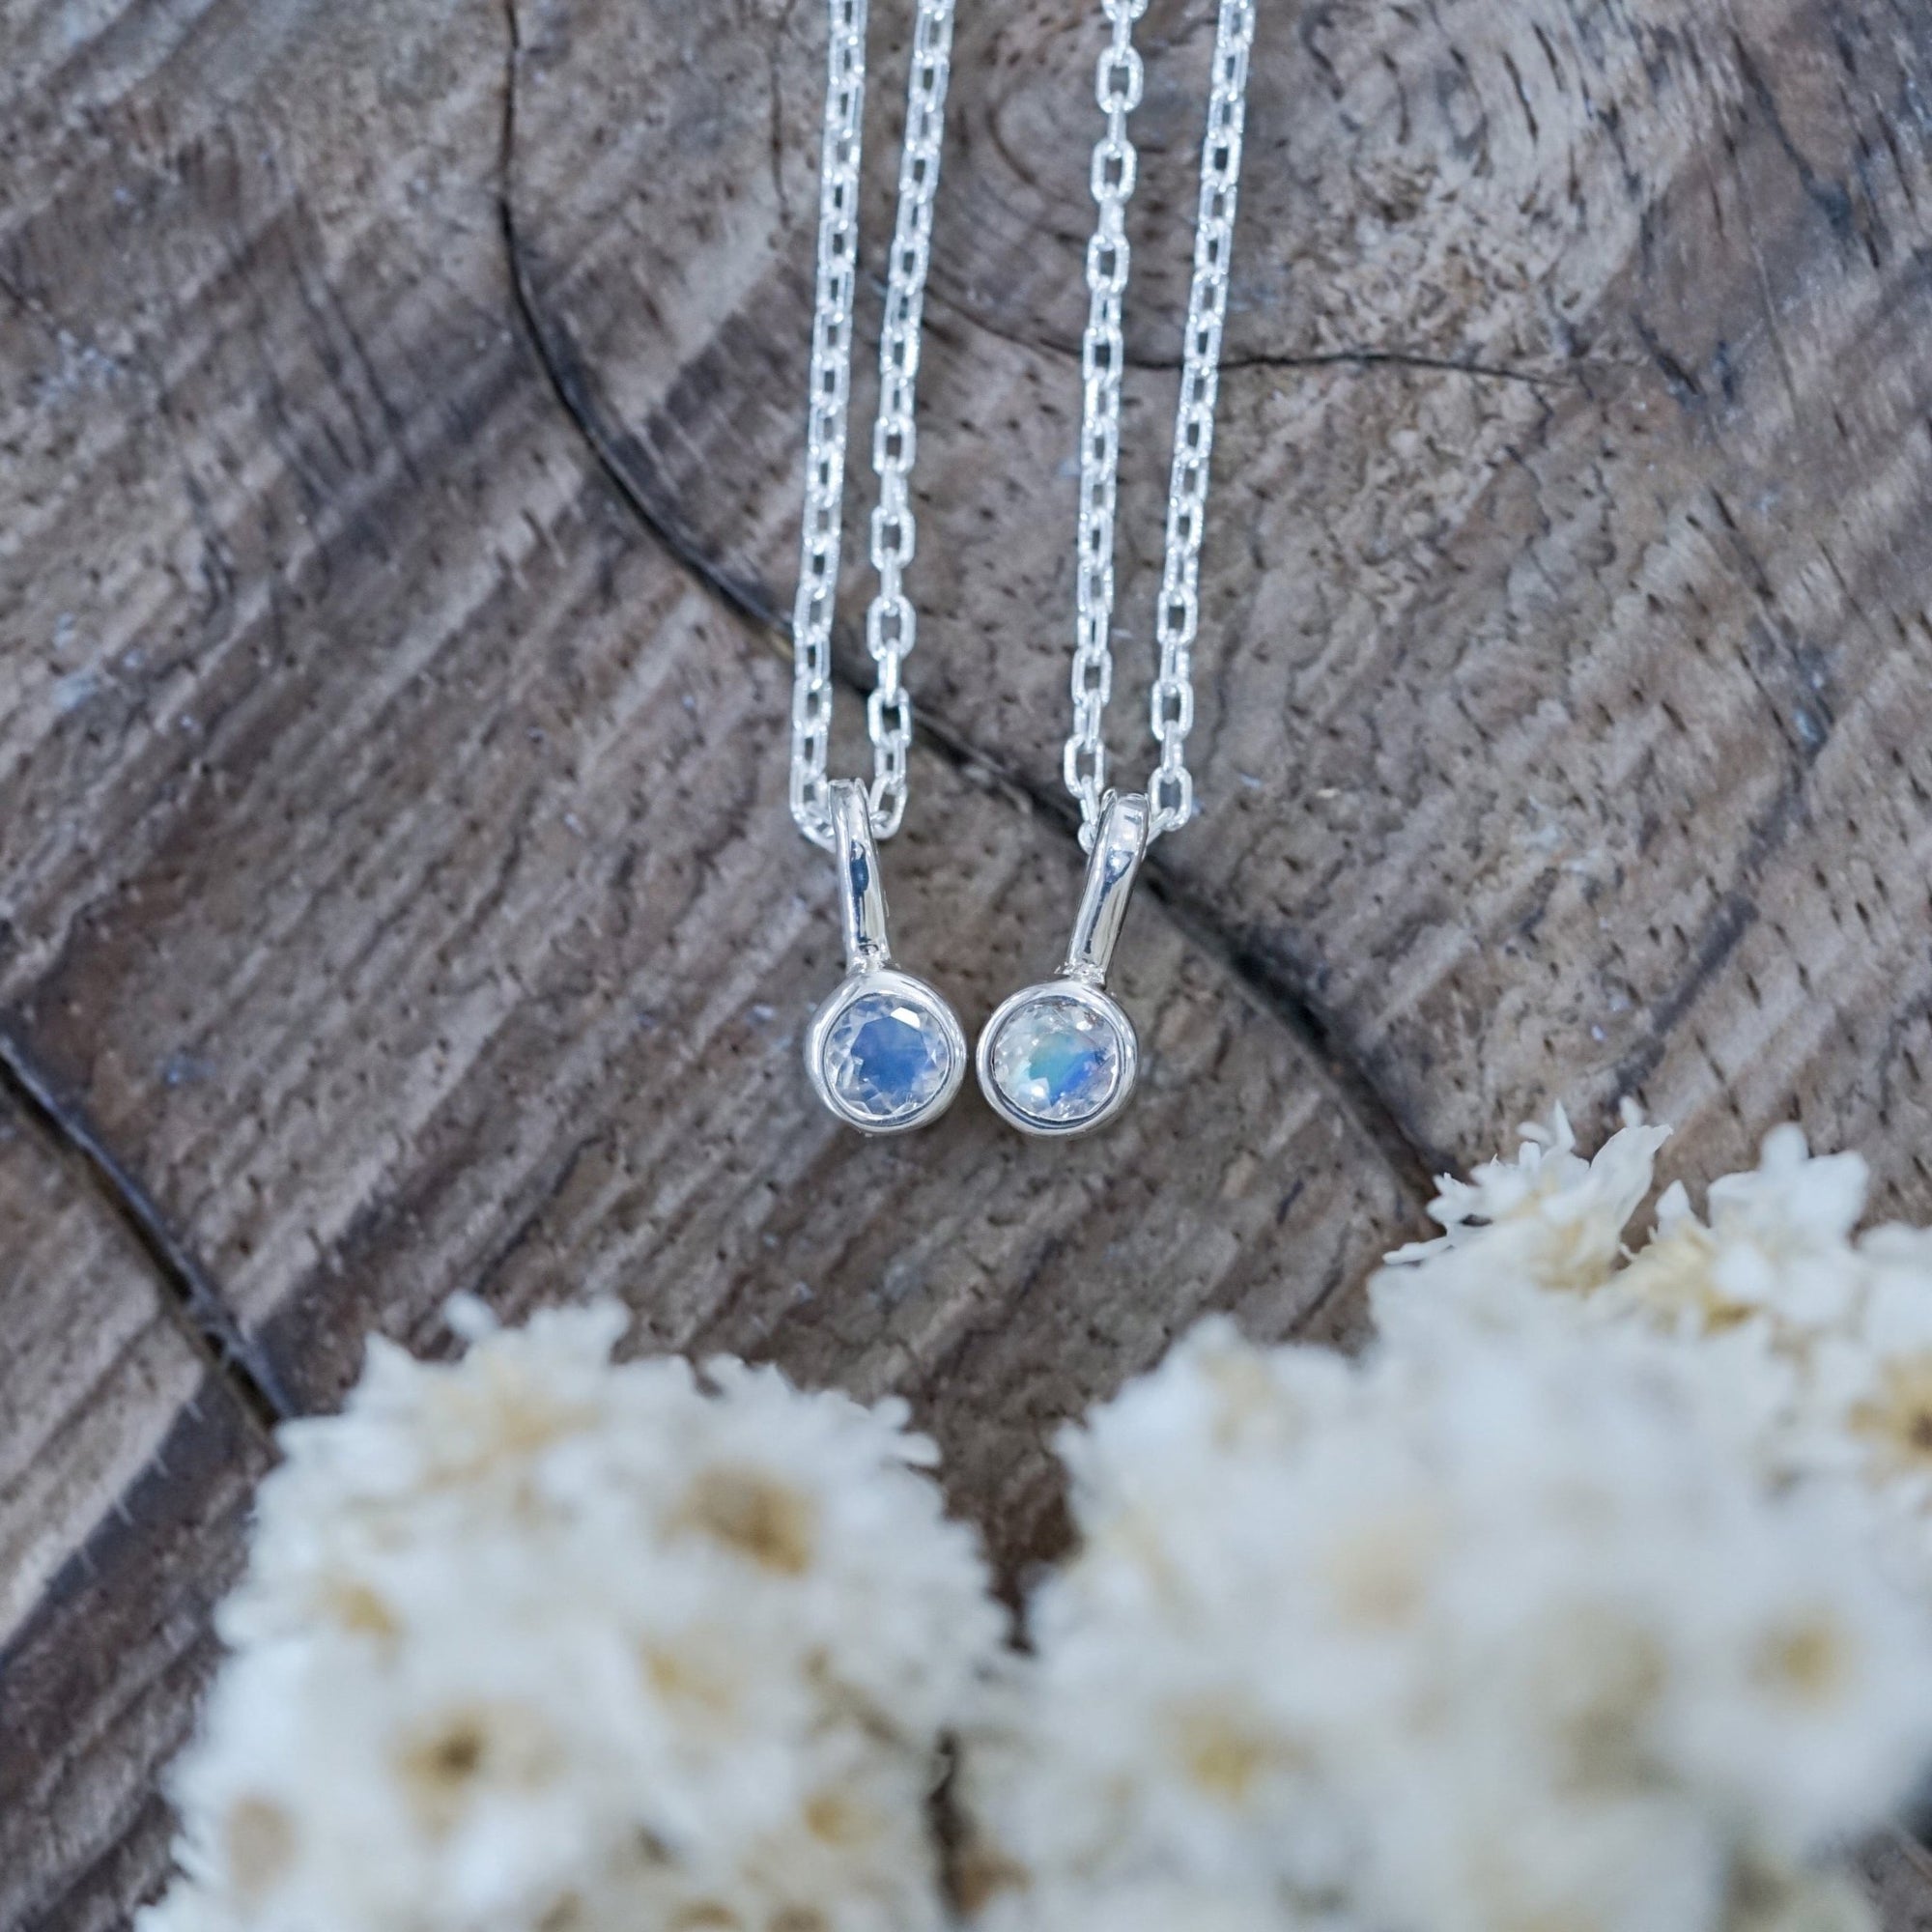 Dainty Rainbow Moonstone Necklace - Gardens of the Sun | Ethical Jewelry